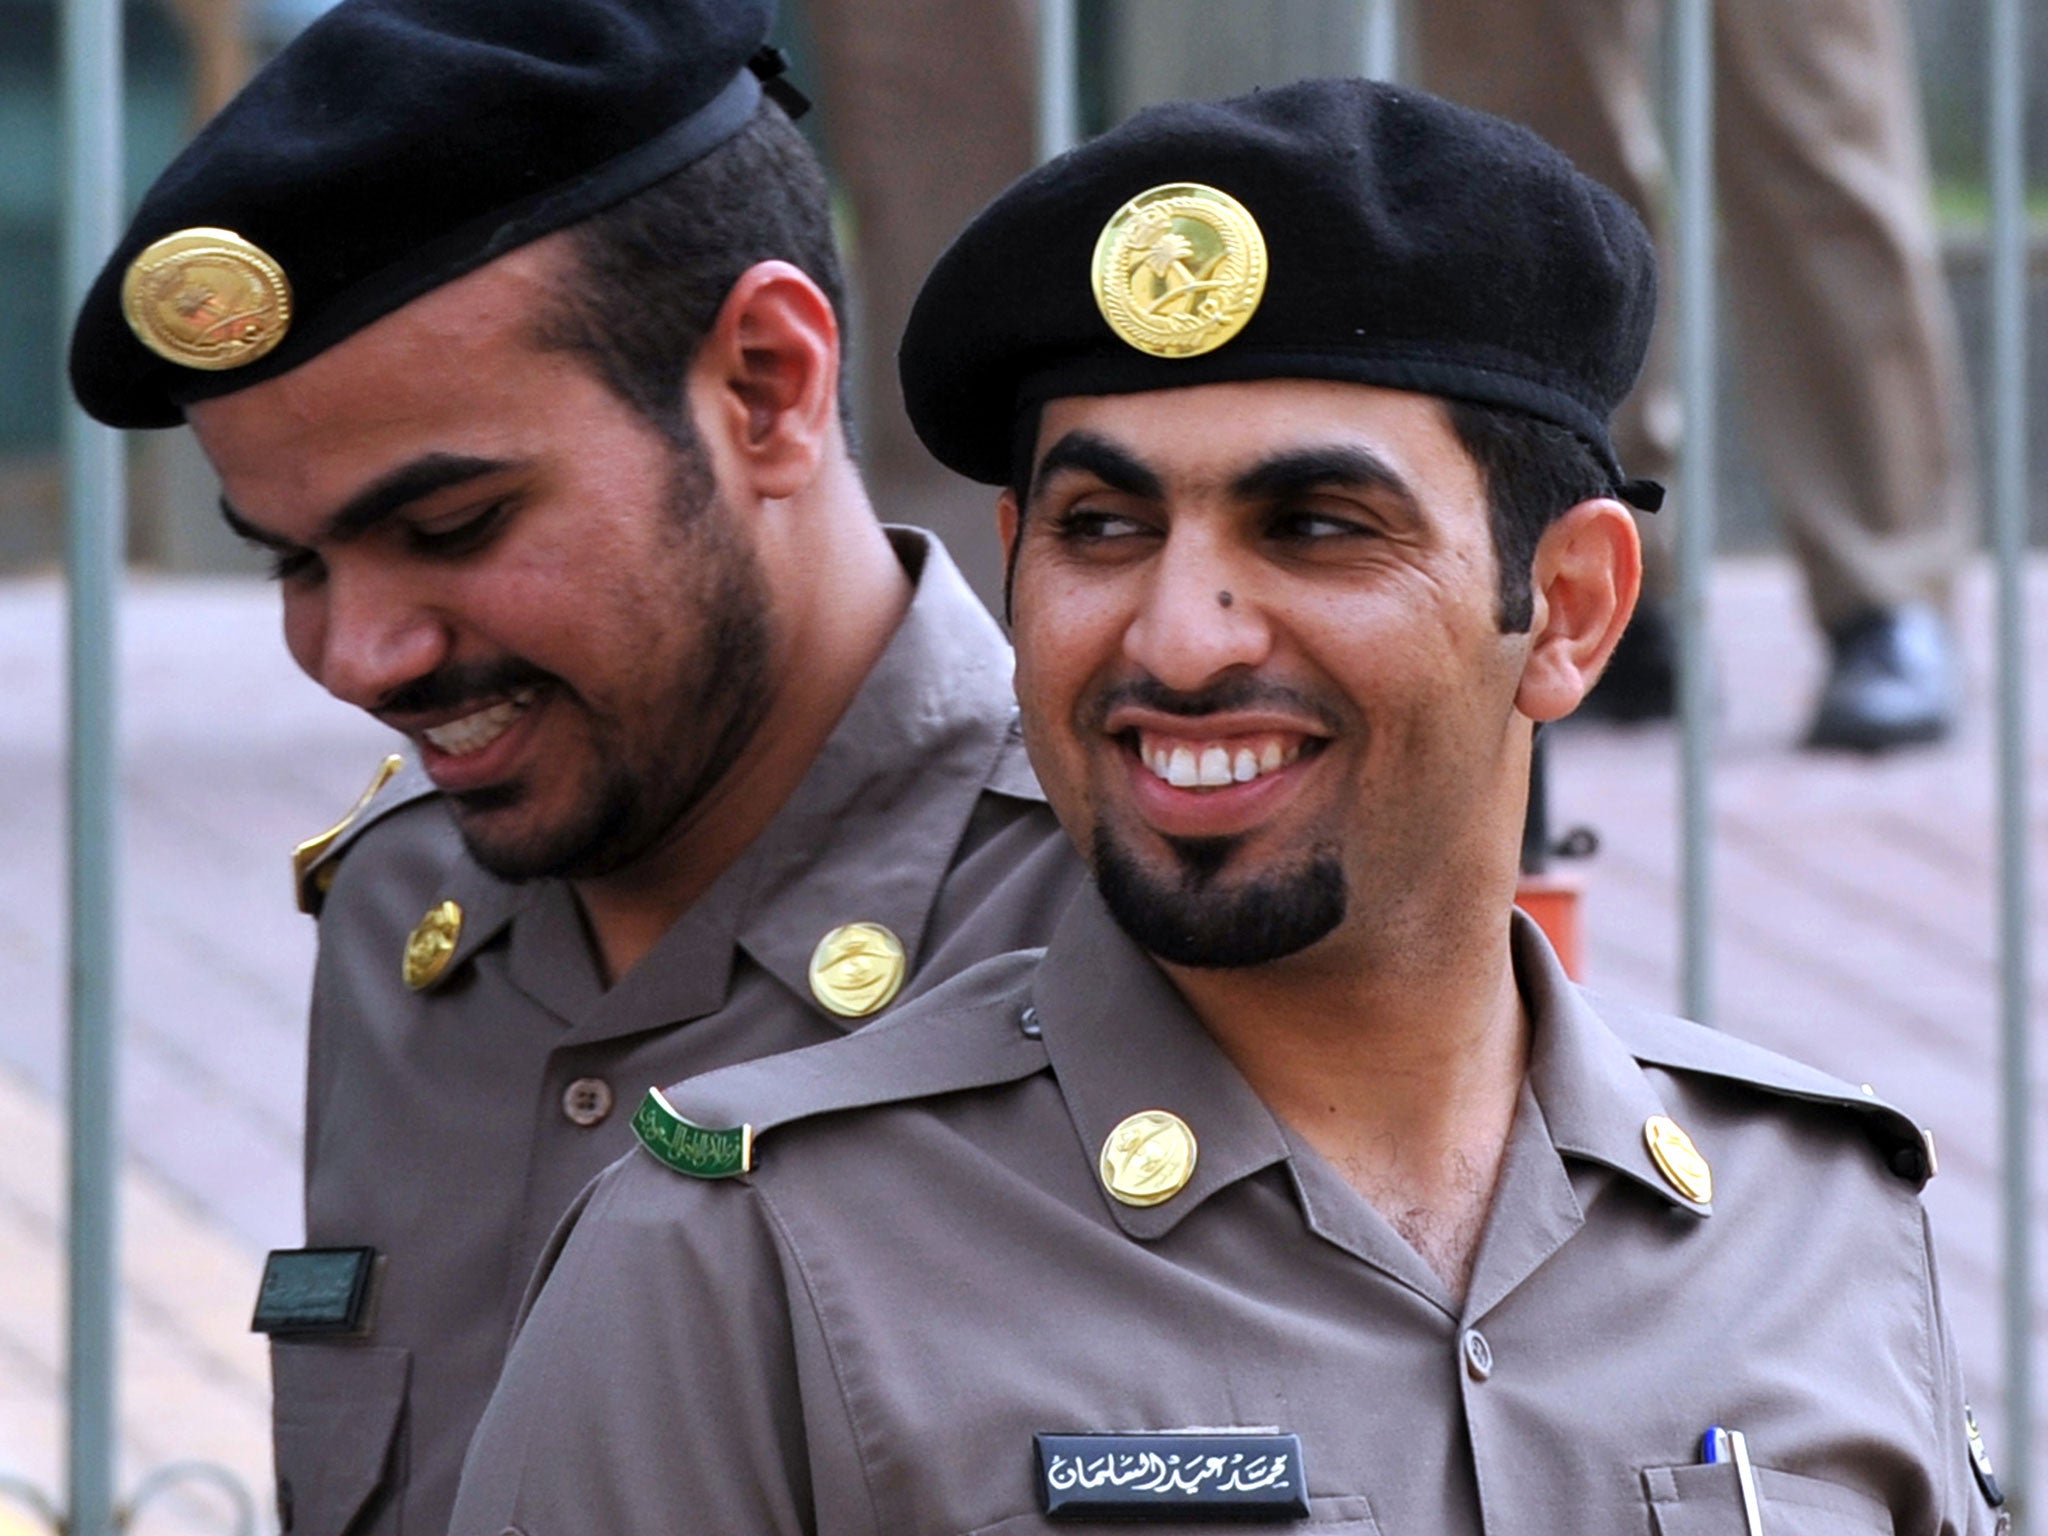 Saudi police officers guard the Public Grievances Department in Riyadh